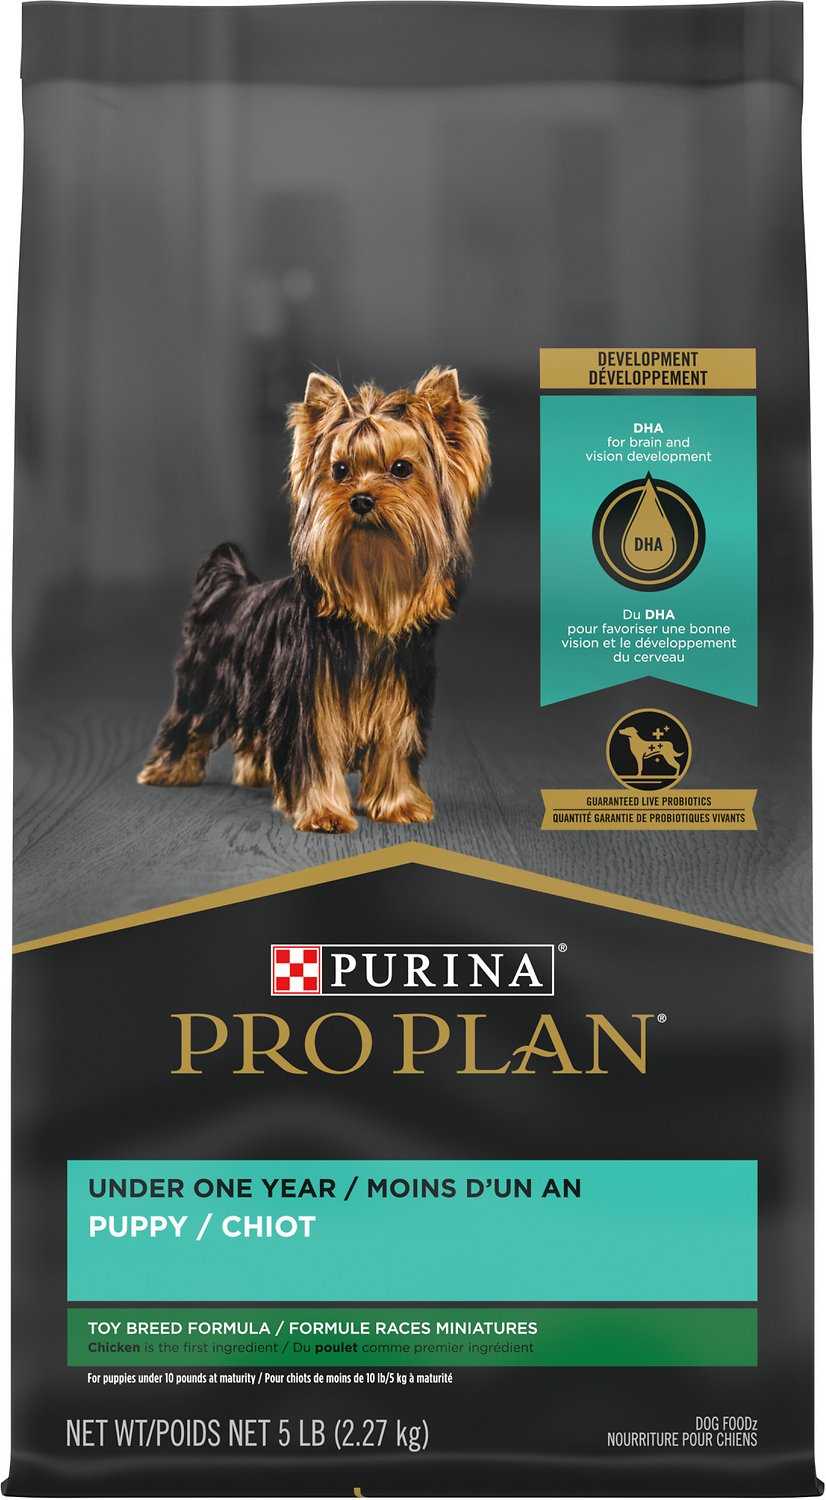 Purina Pro Plan Chicken & Rice Formula Toy Breed Dry Puppy Food